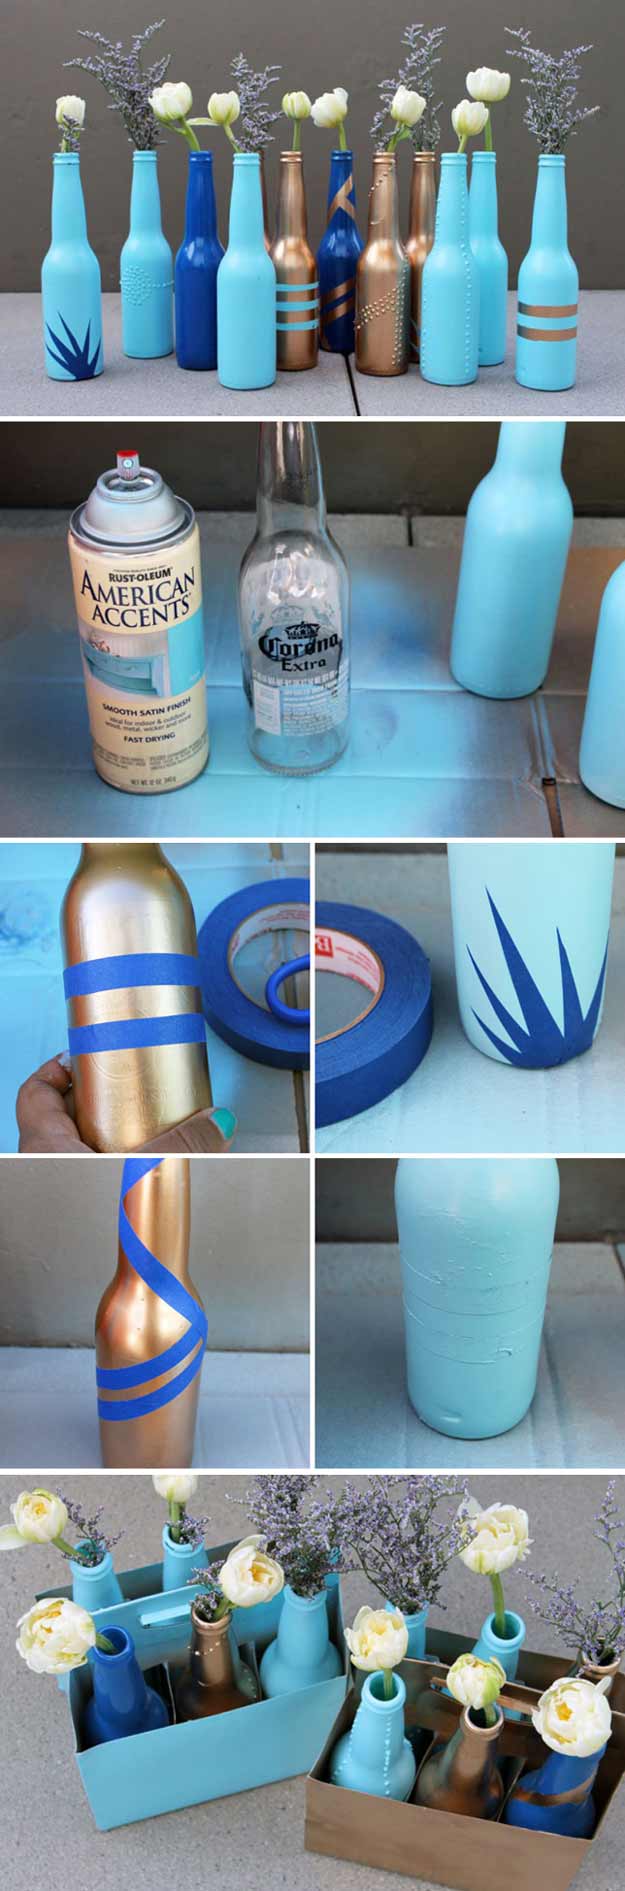 Uses for Beer Bottles DIY Projects Craft Ideas \u0026 How To\u2019s for Home Decor with Videos